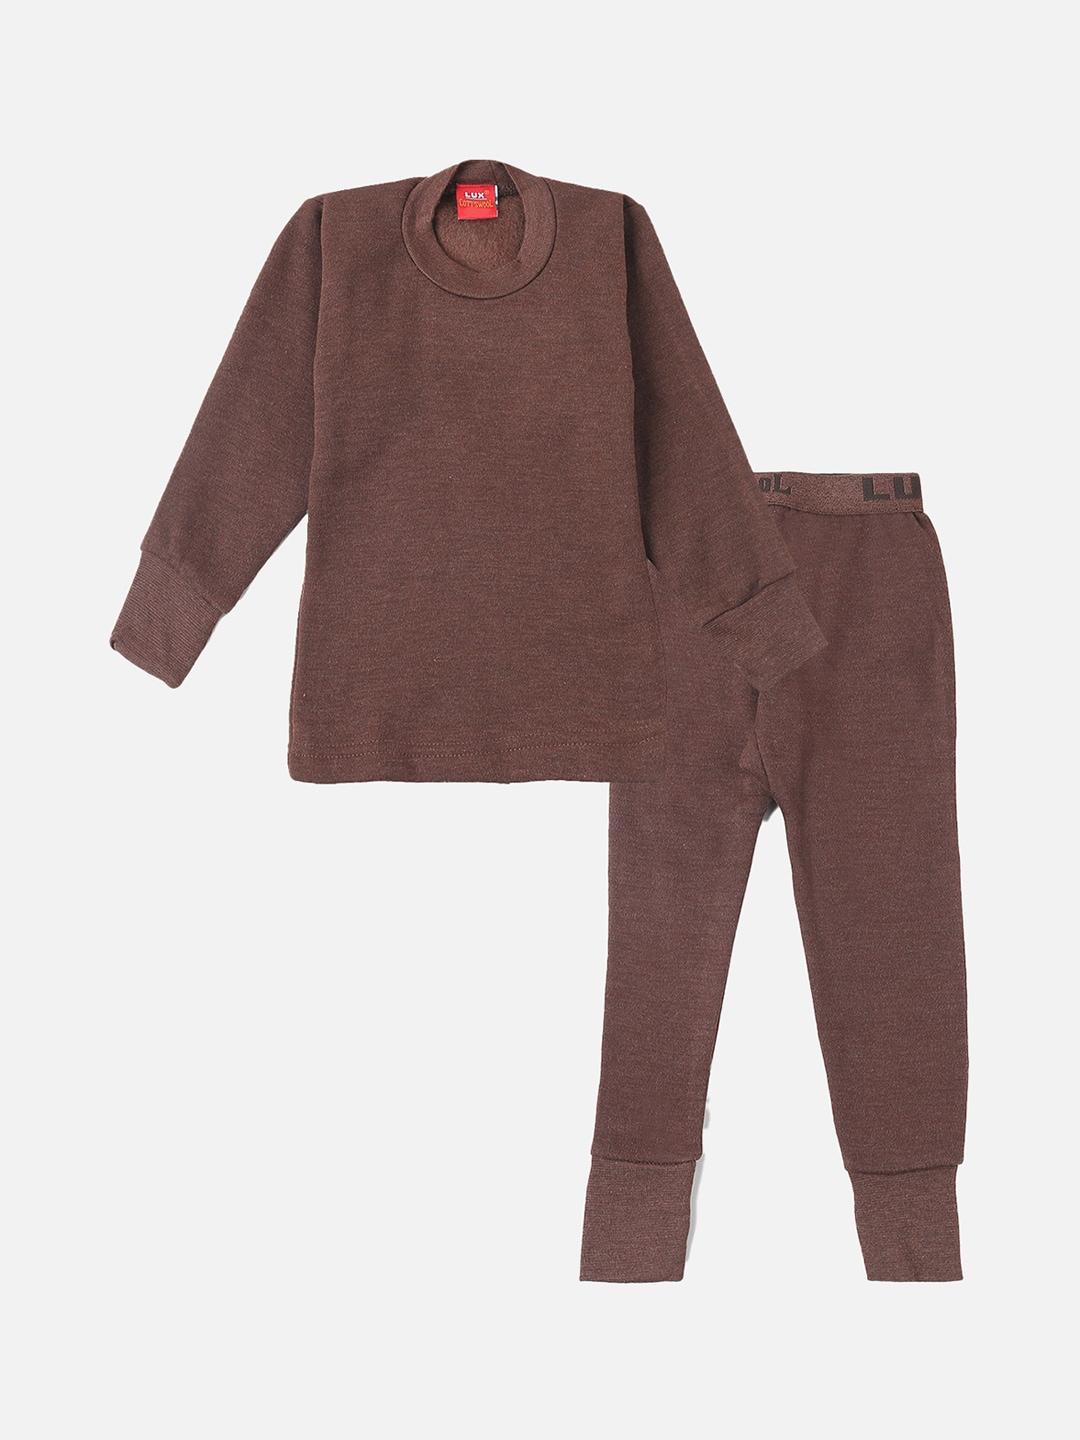 Lux Cottswool Boys Brown Solid Knitted Cotton Slim-Fit Thermal Set